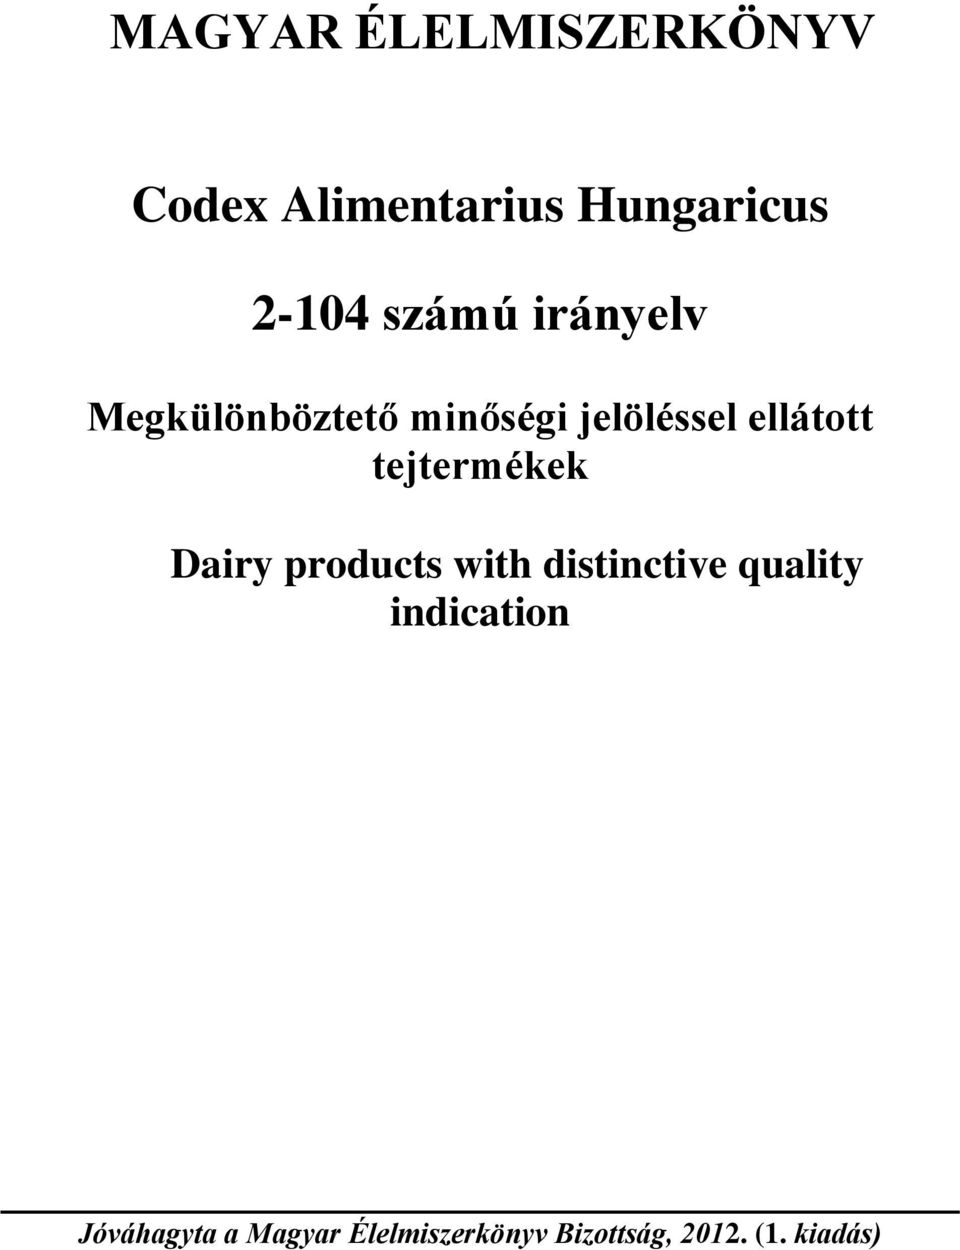 tejtermékek Dairy products with distinctive quality